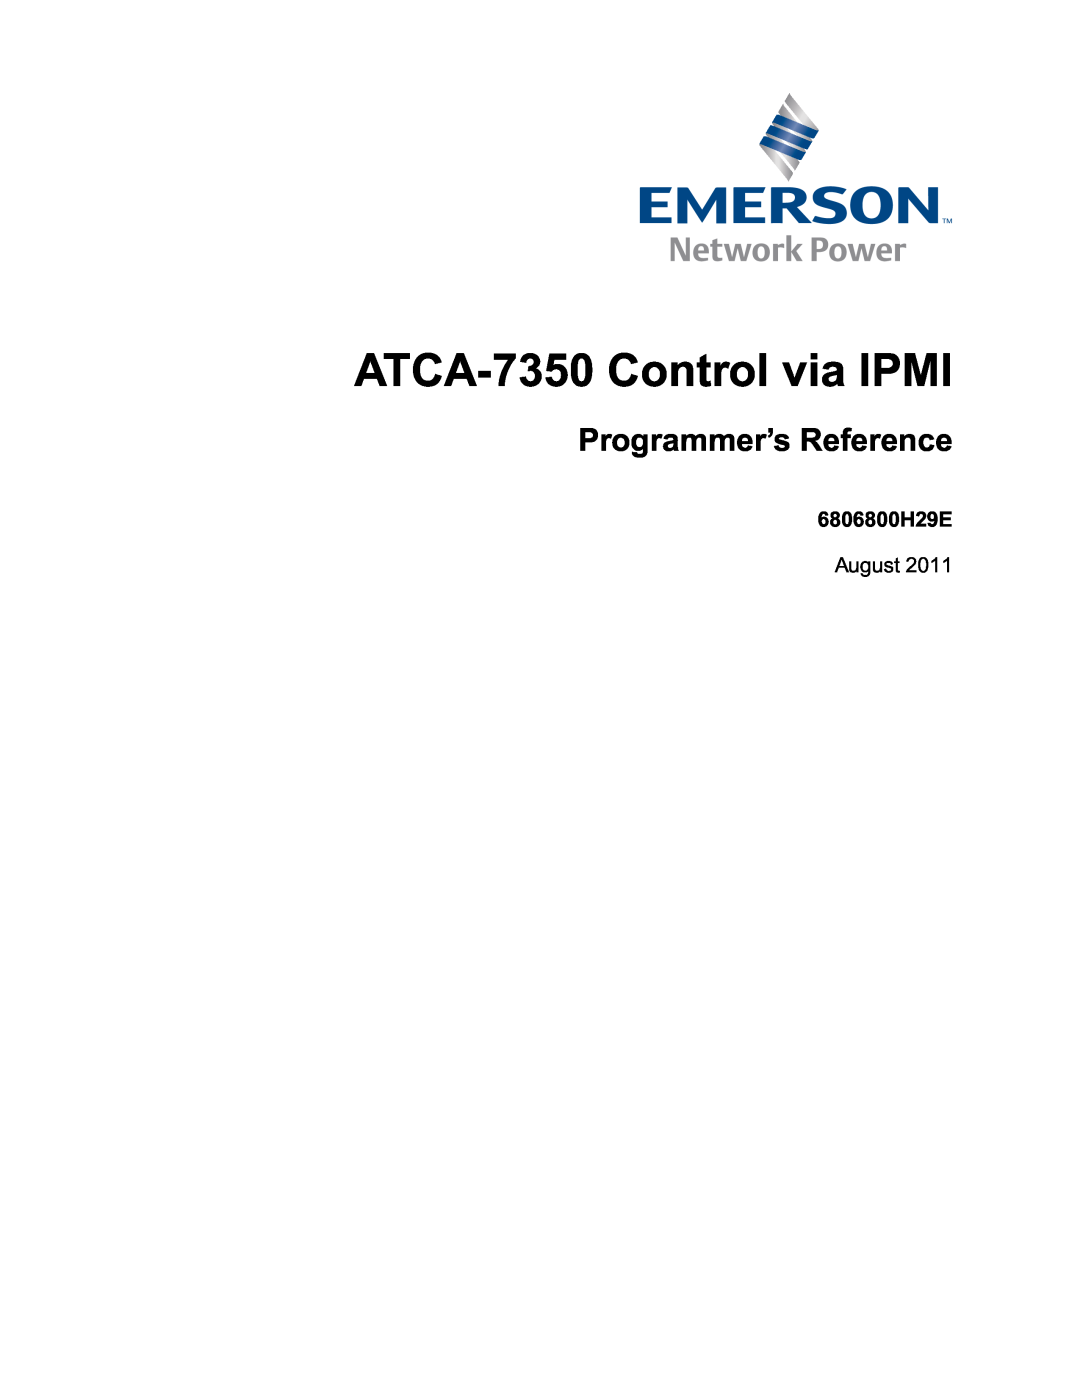 Emerson manual ATCA-7350Control via IPMI, Programmer’s Reference, 6806800H29E, August 